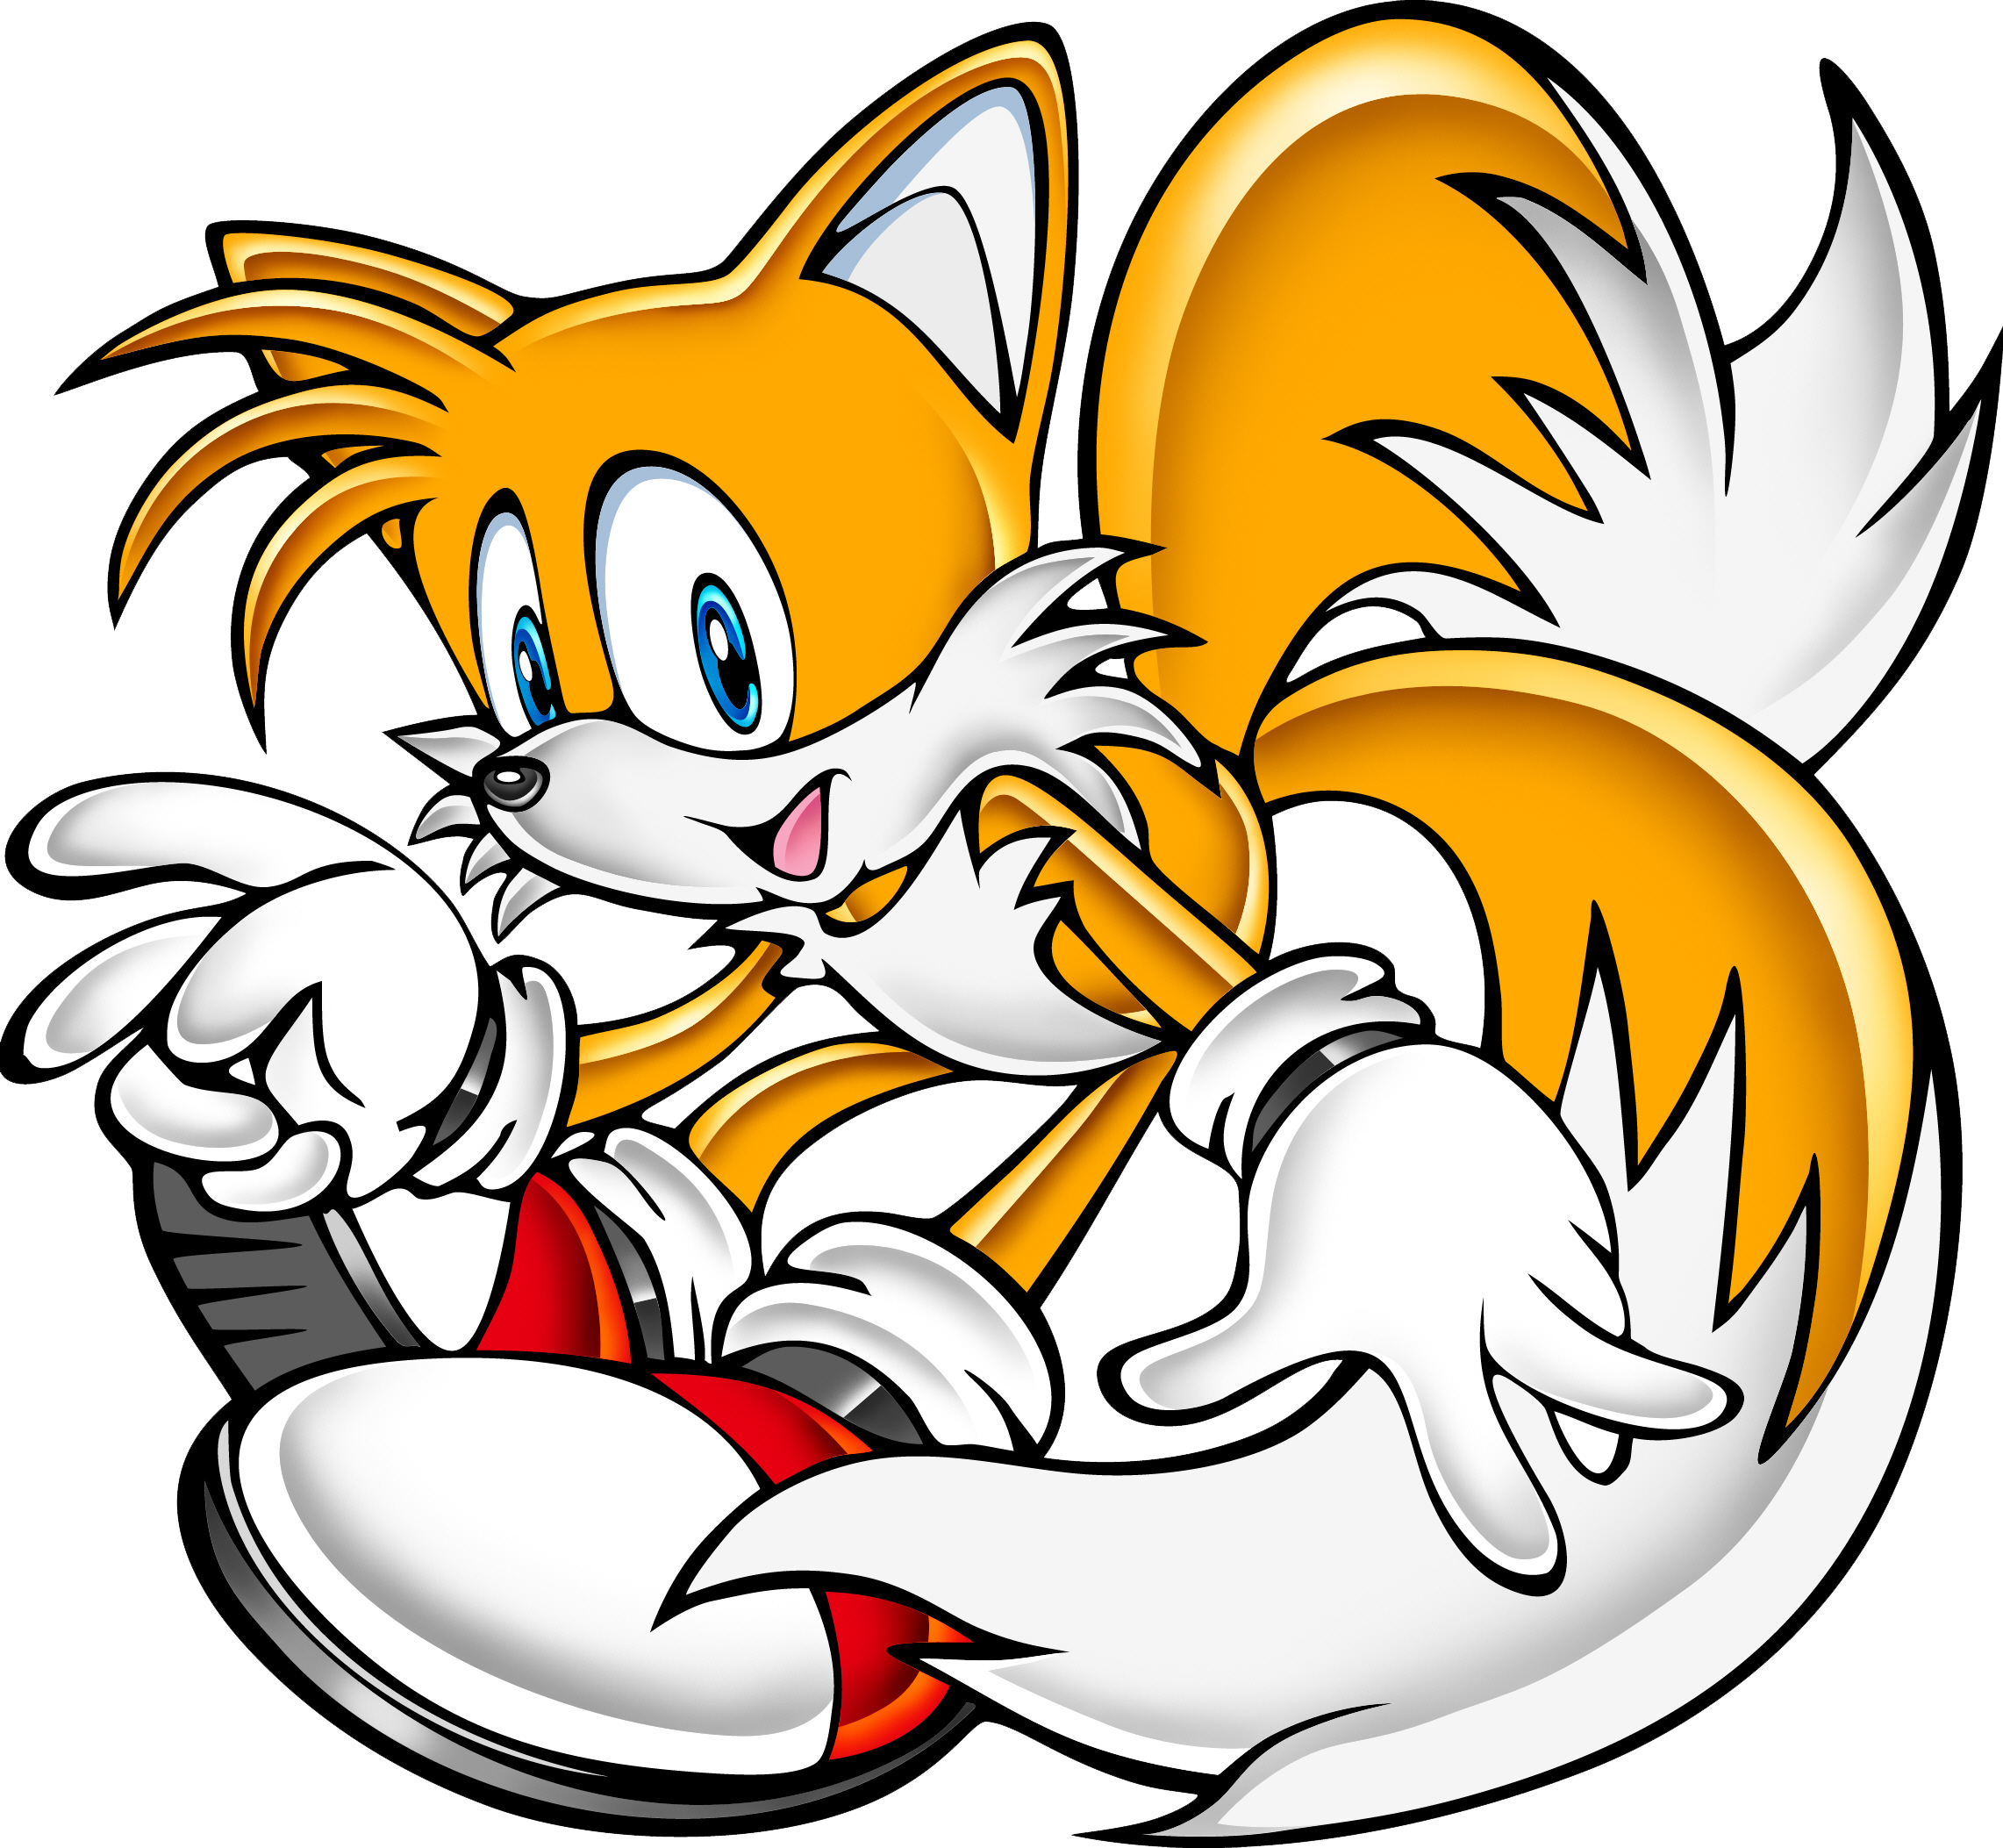 sonic-the-hedgehog-tails-adventure-fox-clip-art-png-816x855px-sonic-images-and-photos-finder